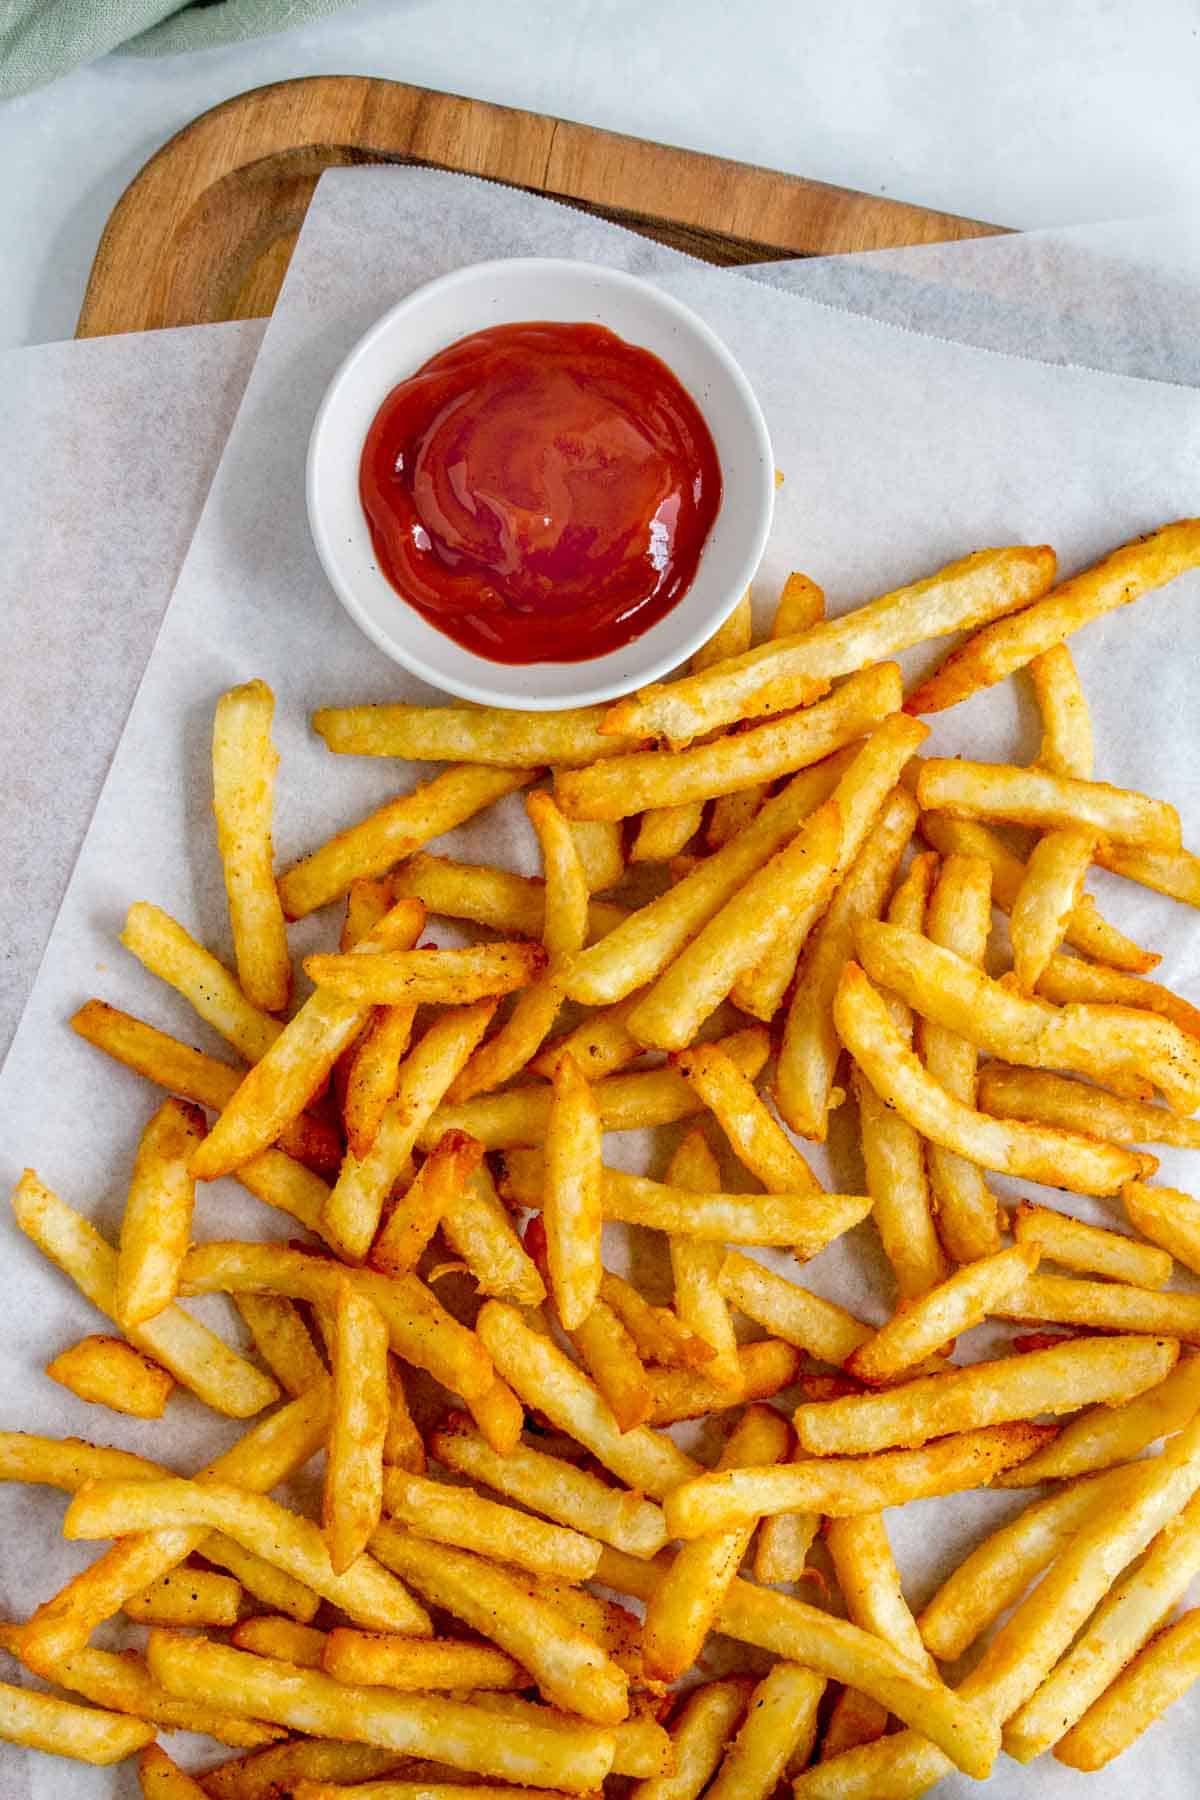 Air fryer frozen fries on a serving board with ketchup.